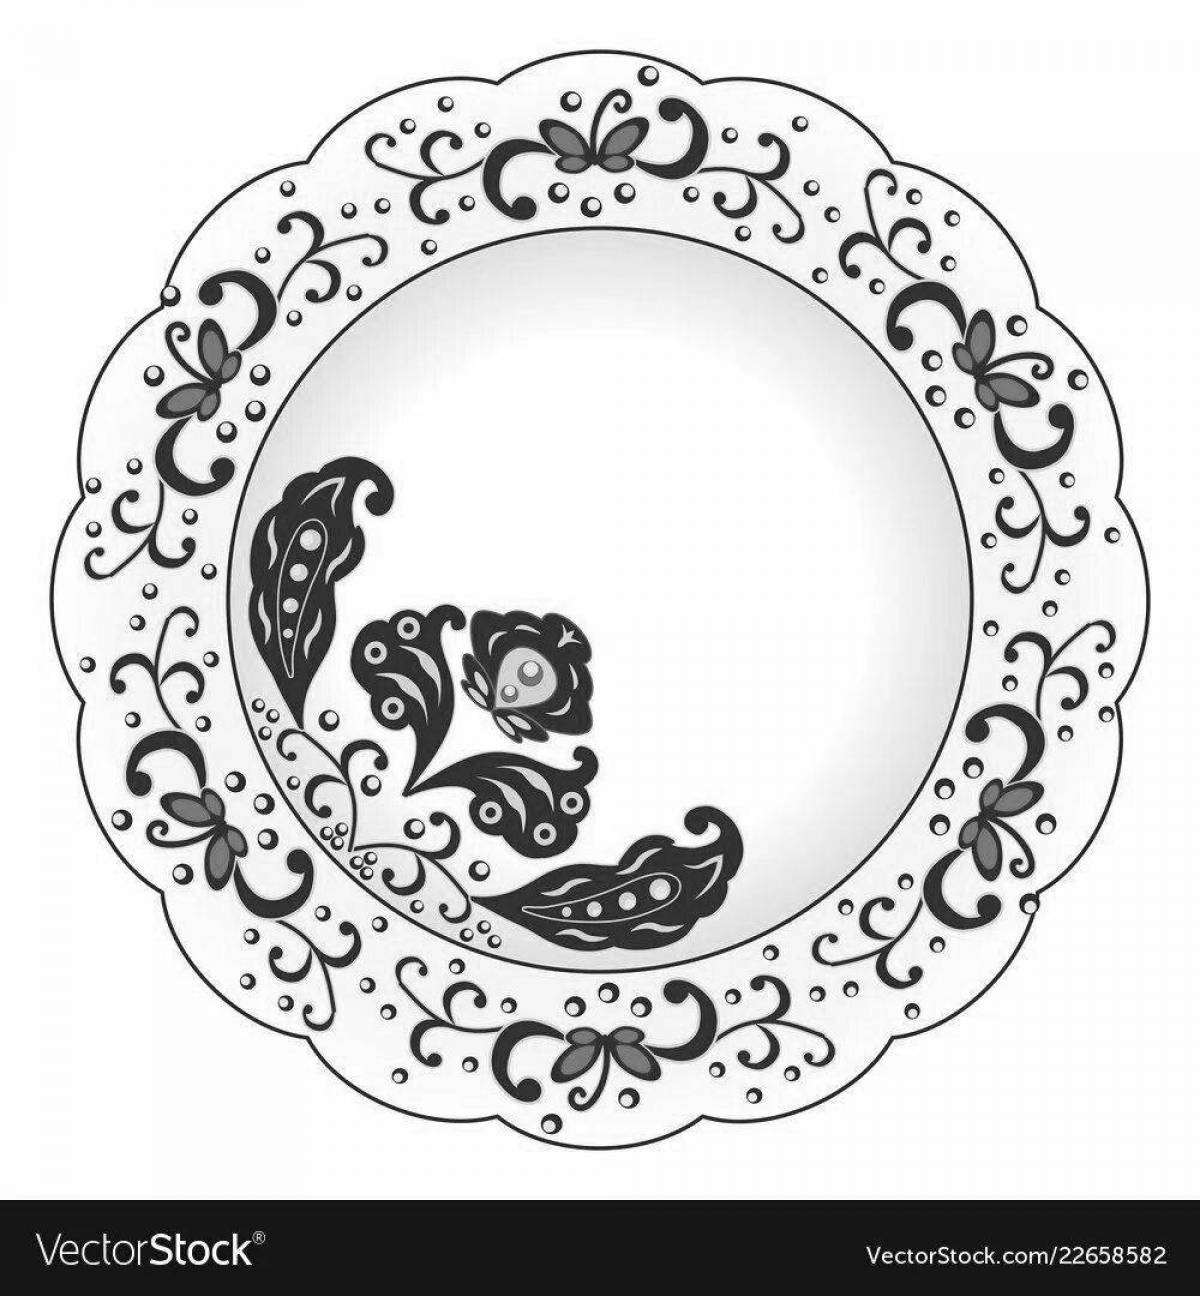 Plate template with cheerful Gzhel painting